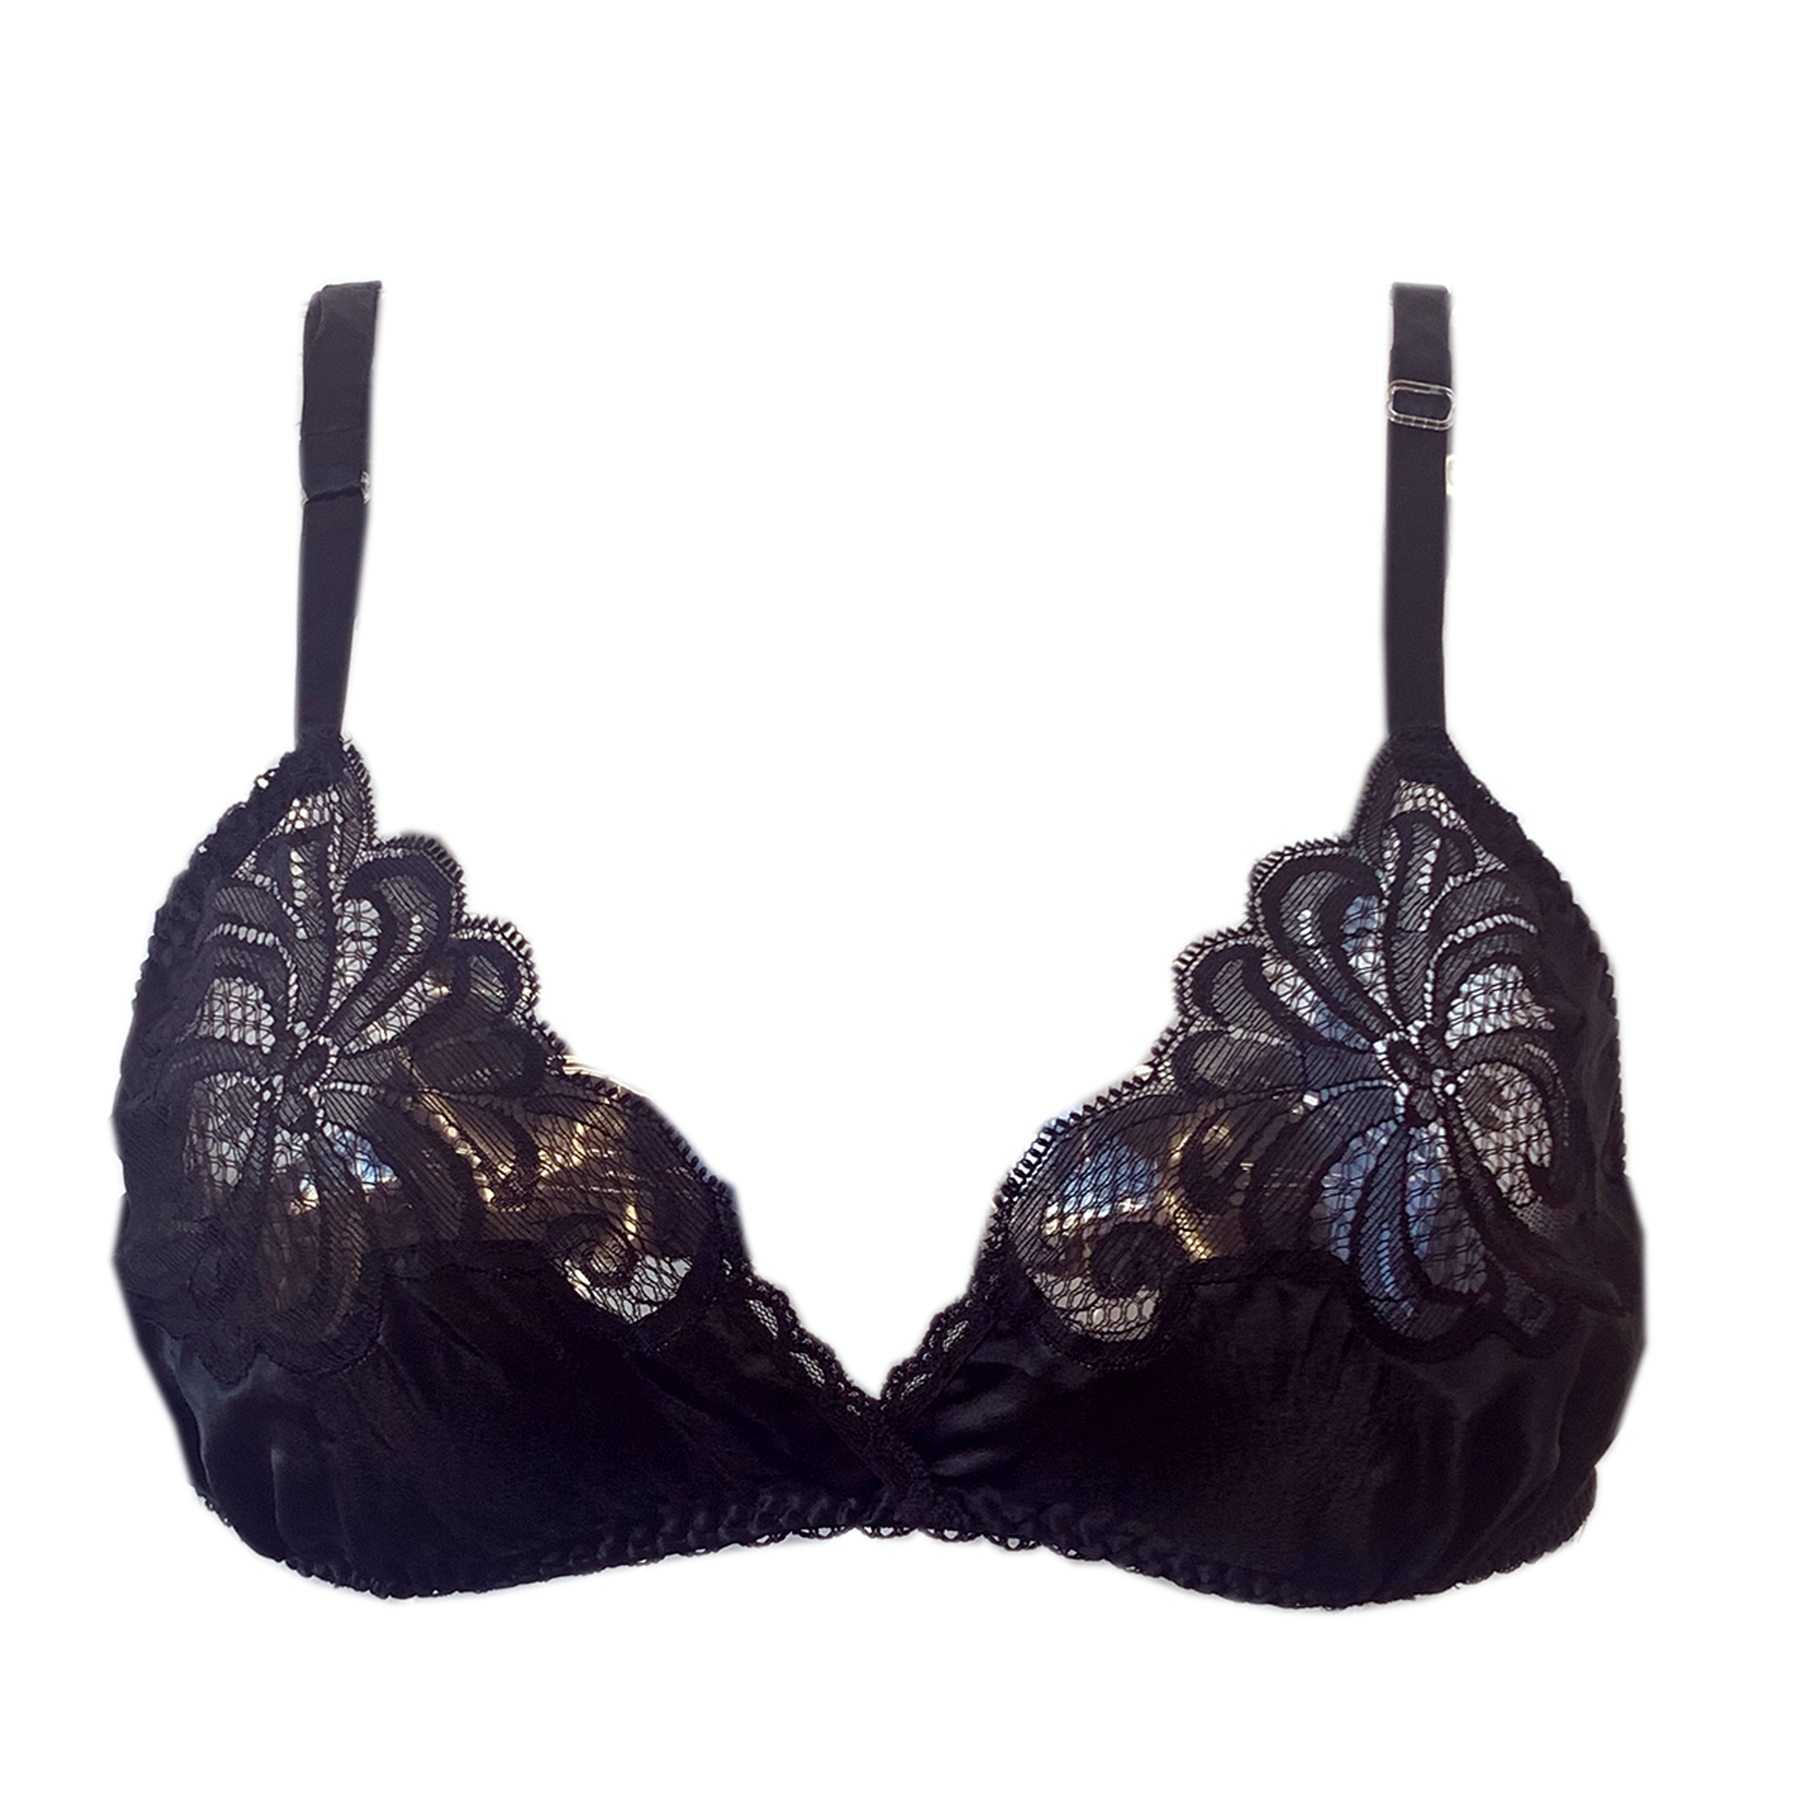 Vintage 90s satin and lace bra – behindcloseddrawers